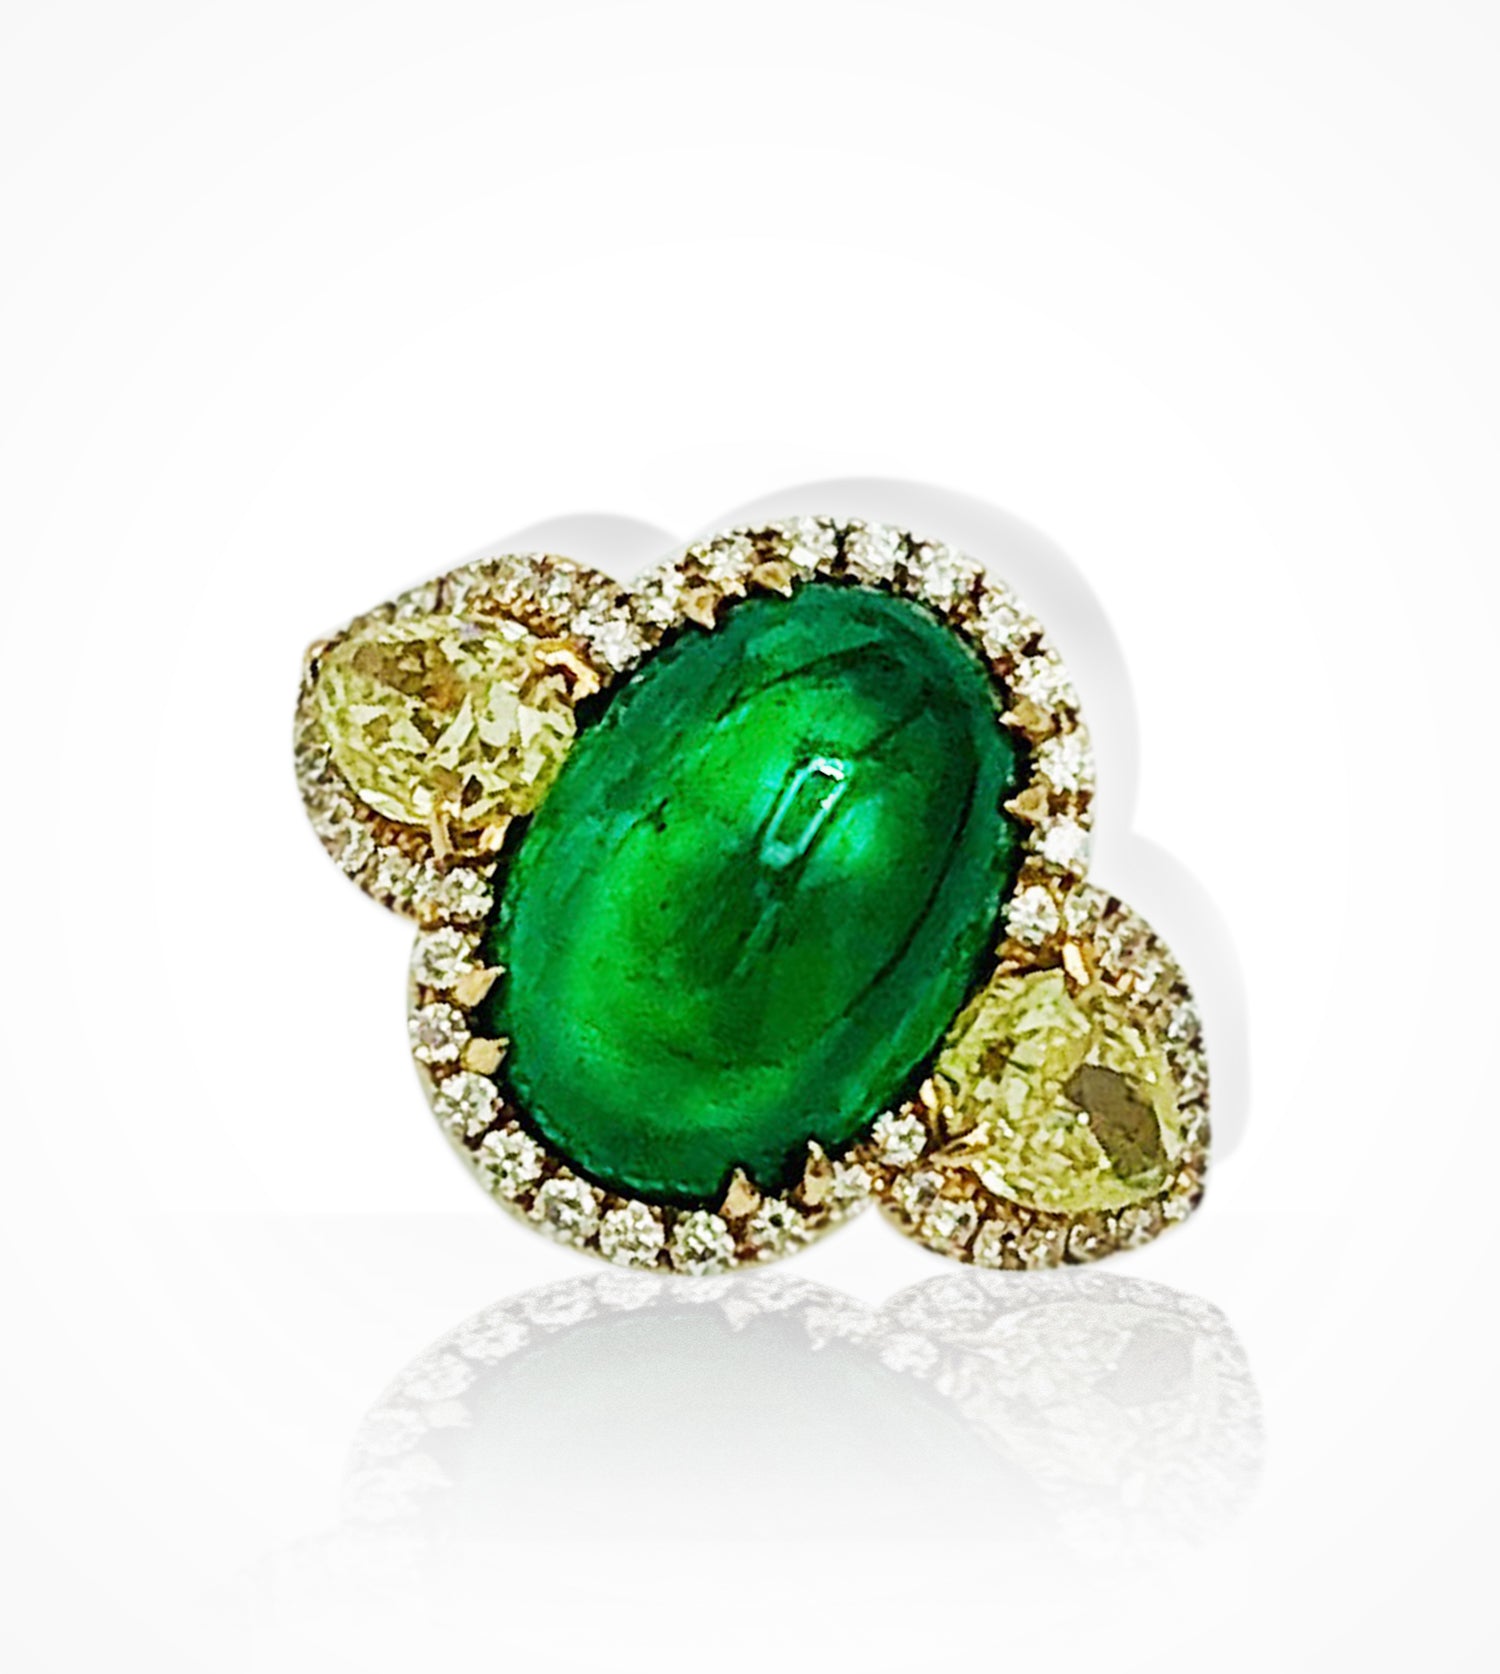 RG00201 18kt rose gold, Emerald, two fancy yellow diamond ring (Price upon request) ready-to-wear jewellery at Secrett.ca in Toronto Downtown Yorkville